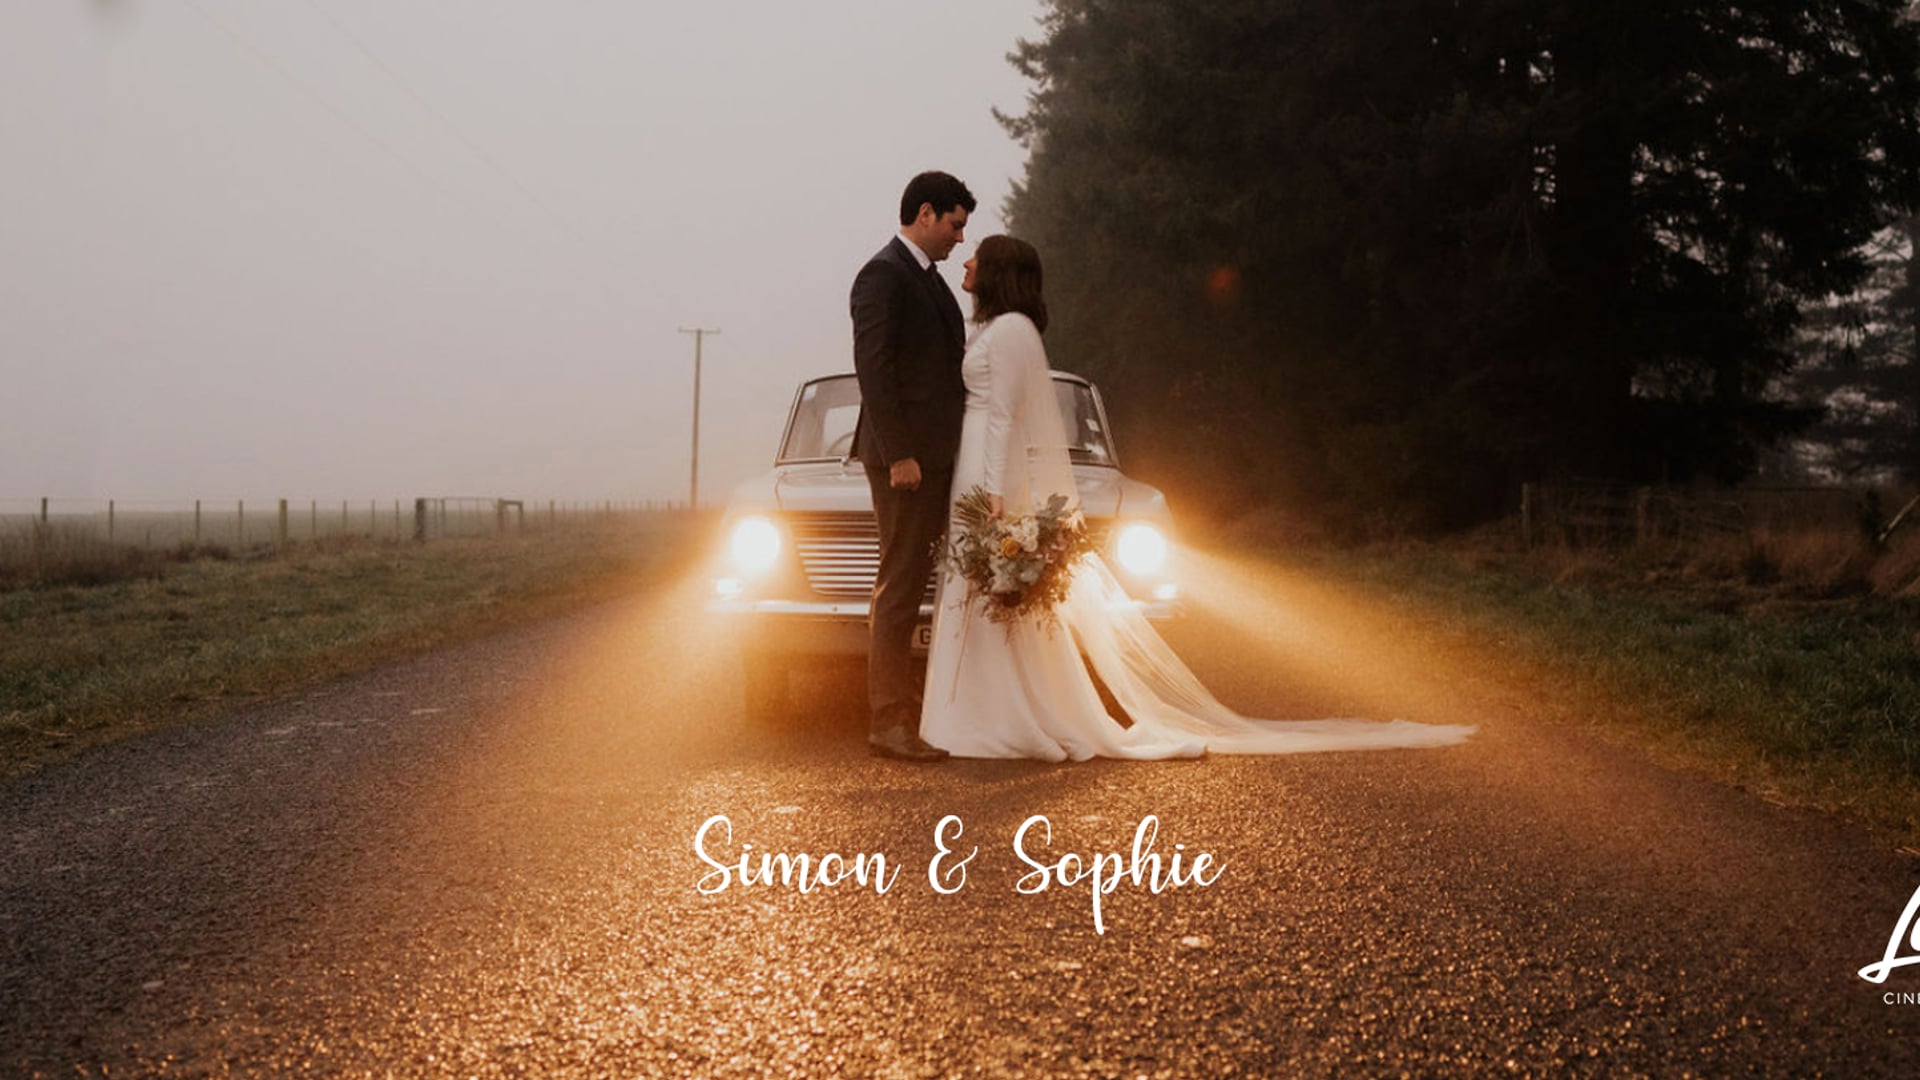 Sophie and Simon